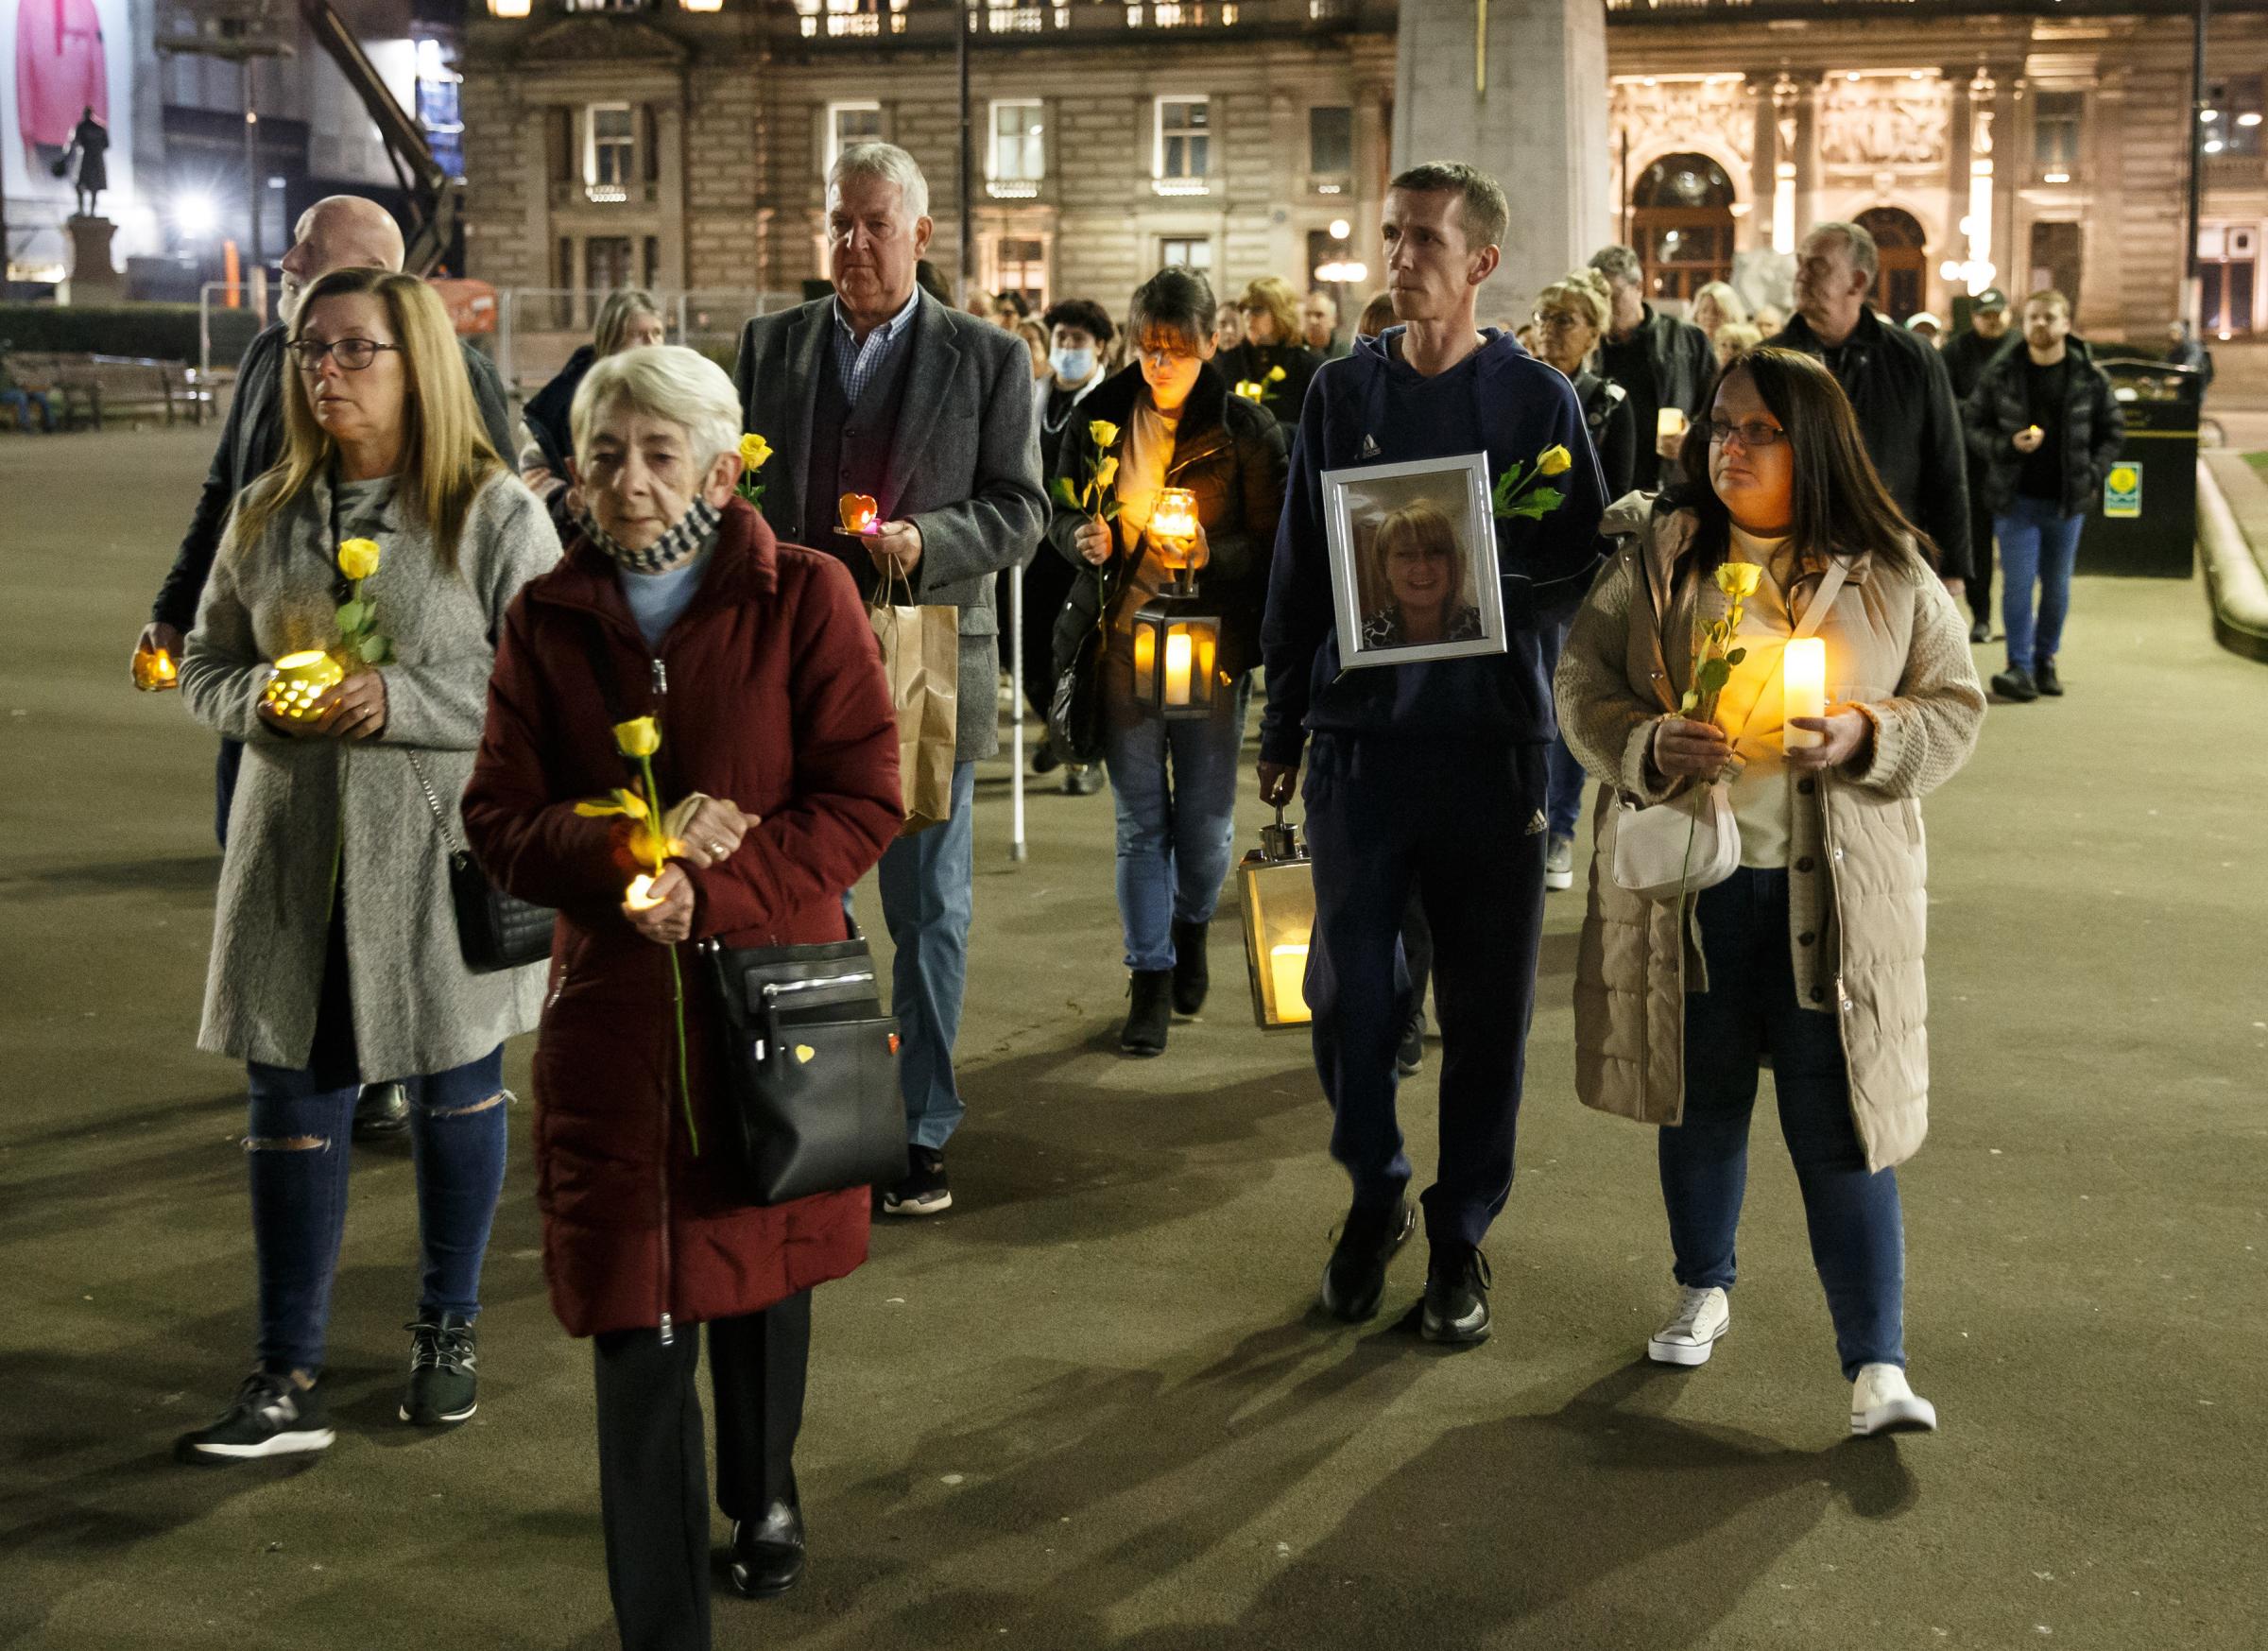 Vigil at George Square, Glasgow to mark the second national lockdown anniversary. The event attended by families who lost loved ones in the covid pandemic was organised by Covid 19 Families Scotland. Pictured are people walking into the square.